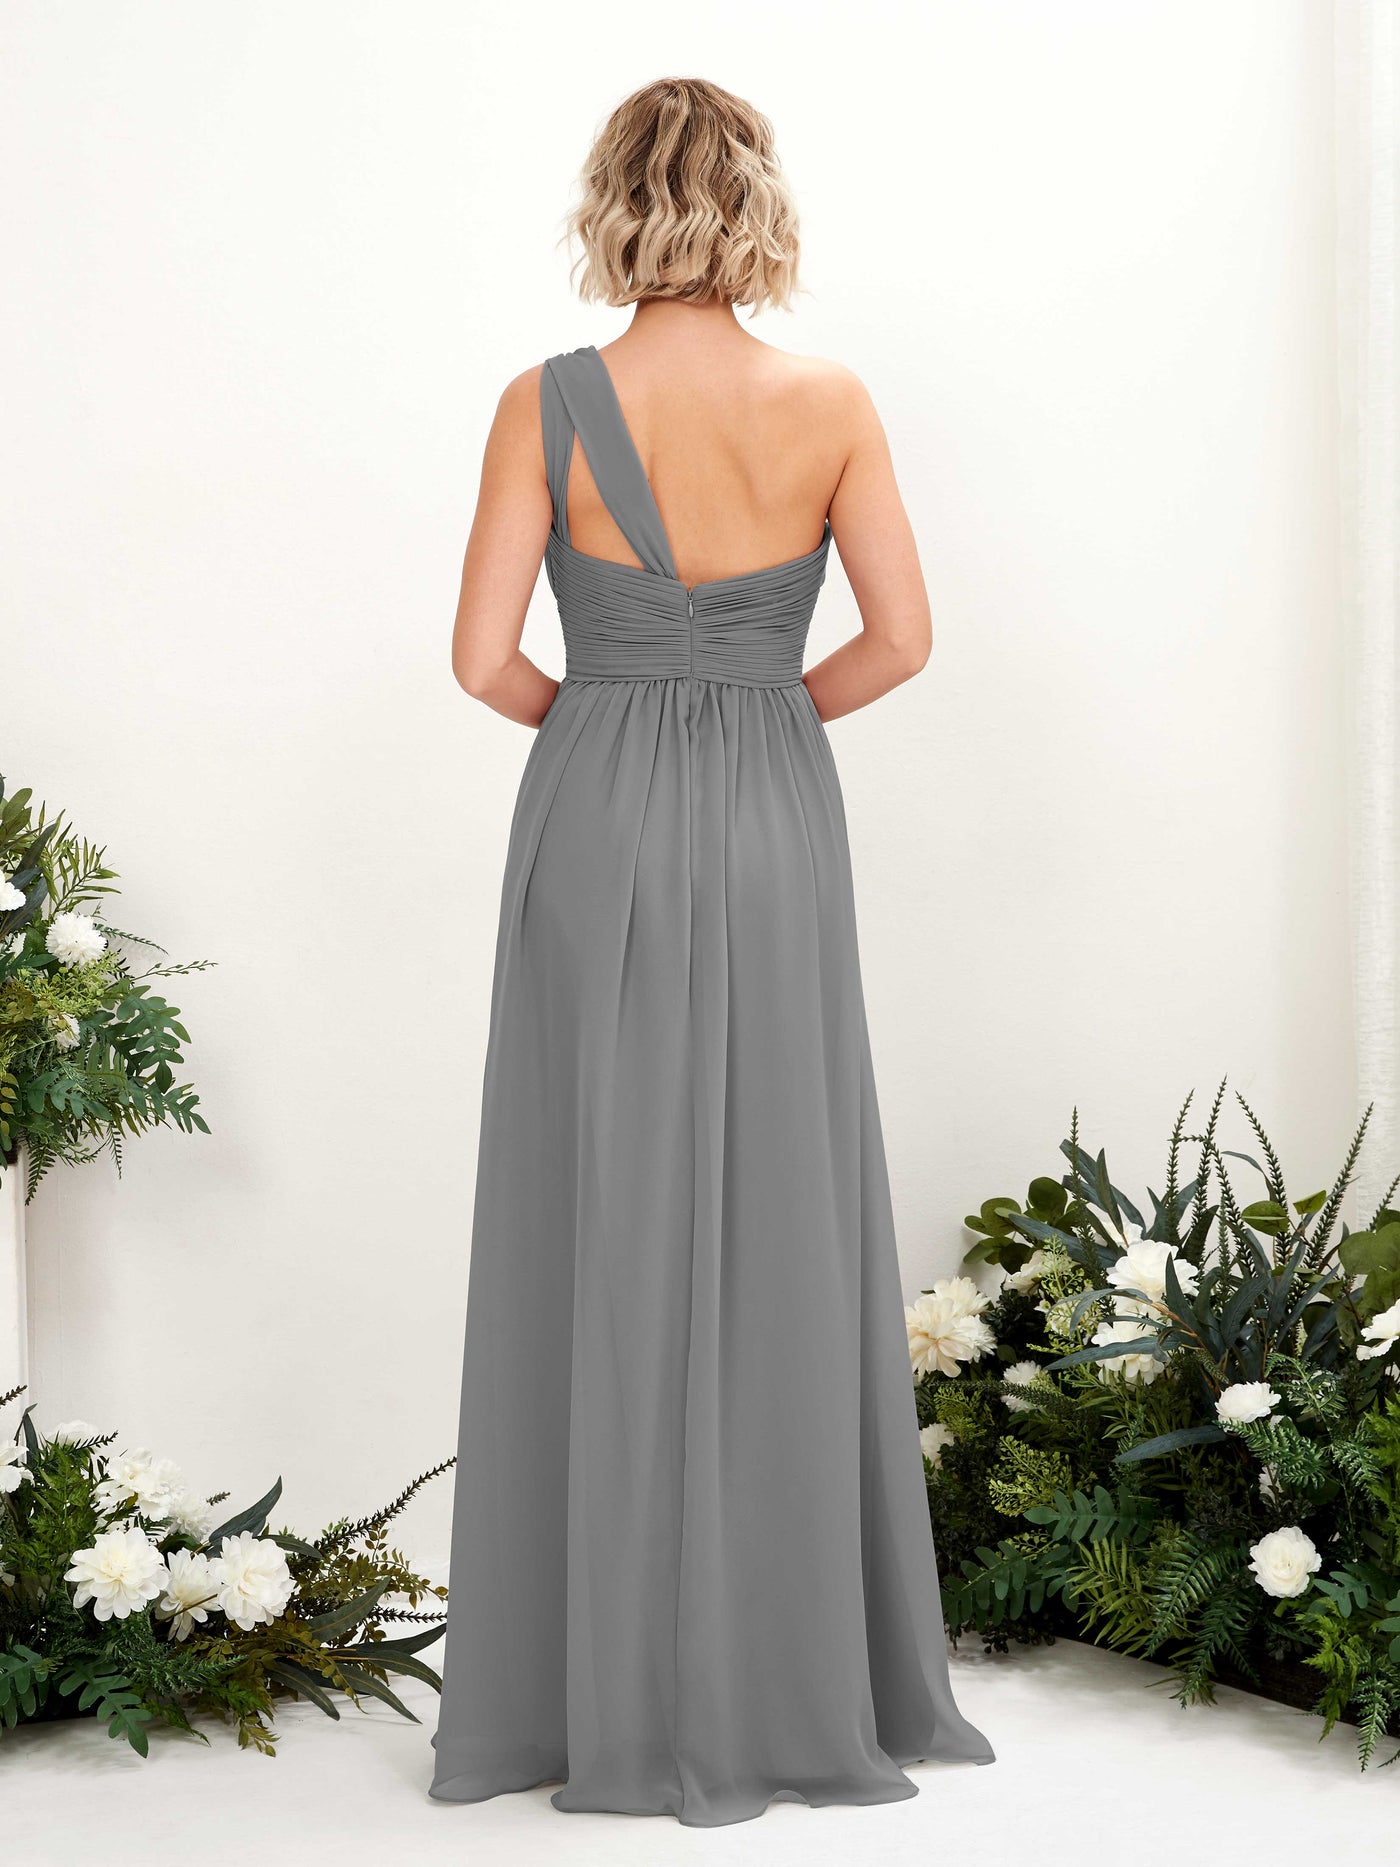 Steel Gray Bridesmaid Dresses Bridesmaid Dress Ball Gown Chiffon One Shoulder Full Length Sleeveless Wedding Party Dress (81225020)#color_steel-gray